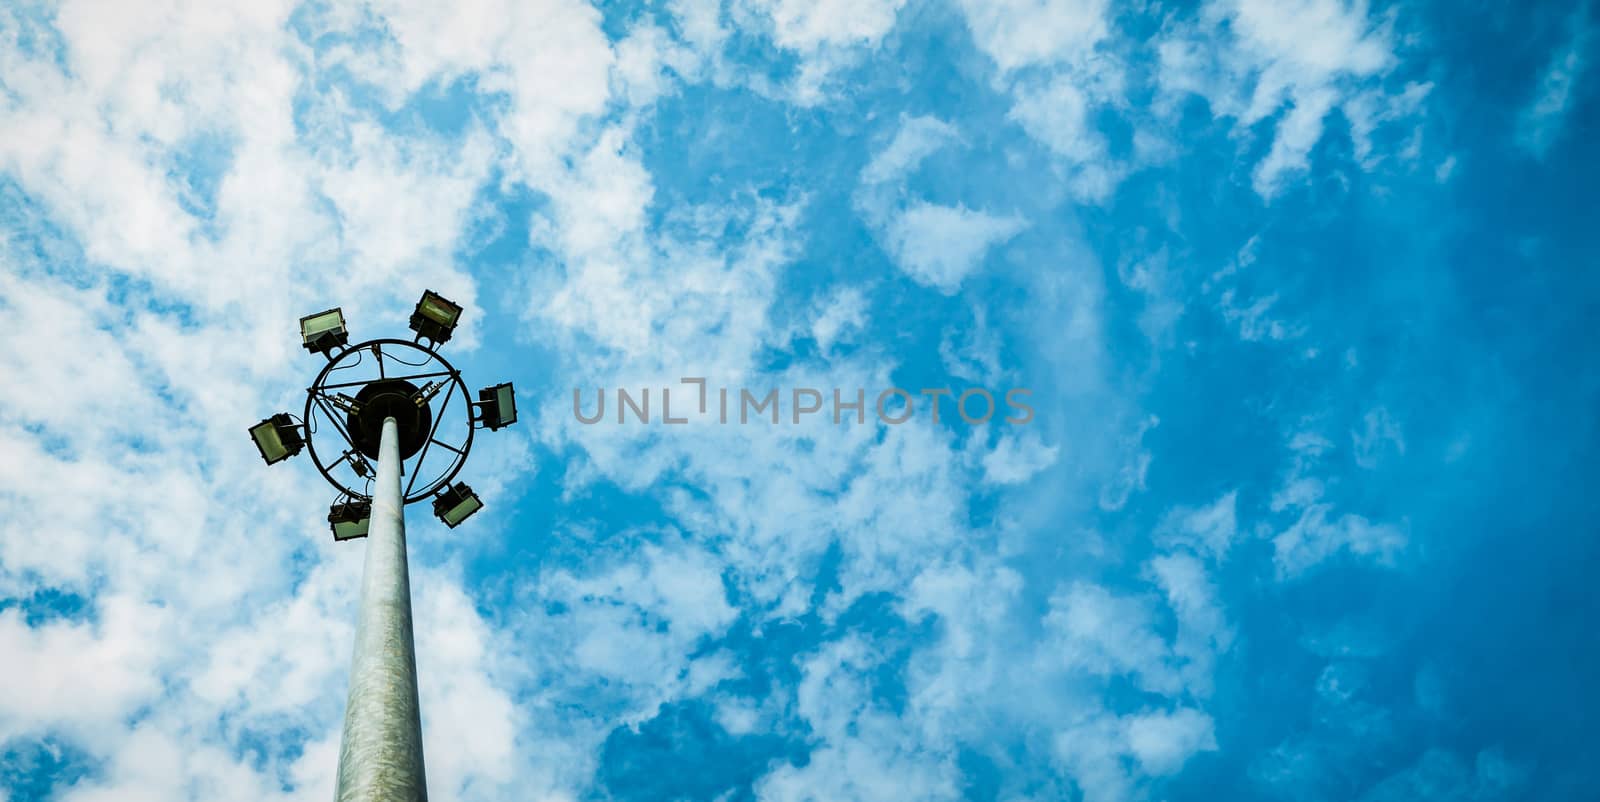 Sport lights of the stadium with pole on beautiful blue sky and white cumulus clouds with copy space for text.